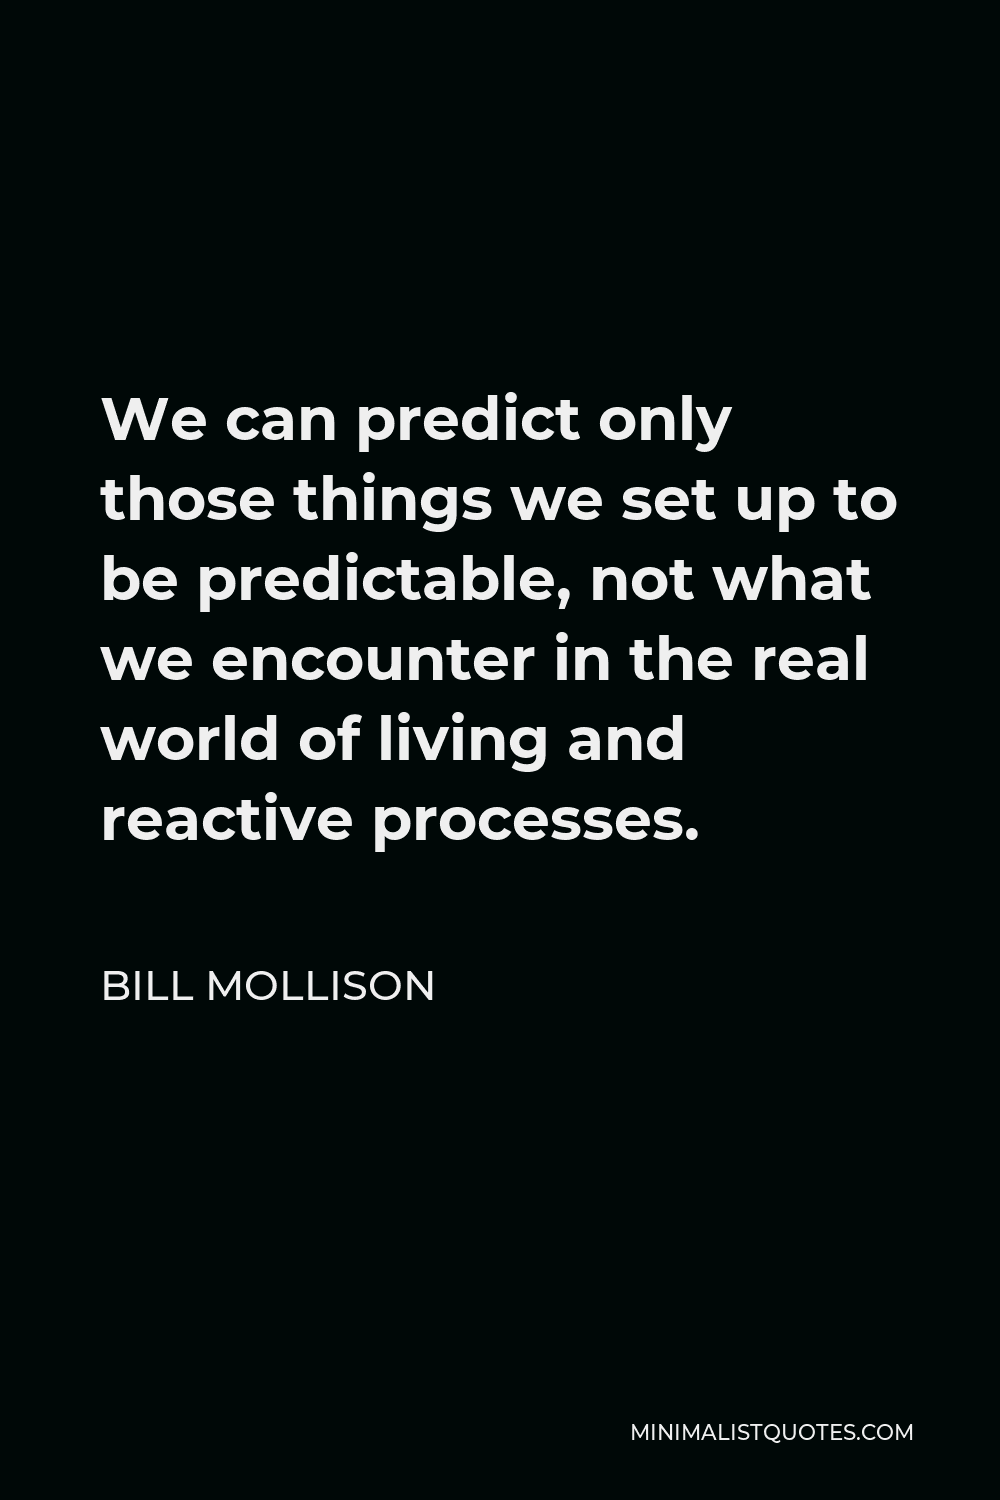 Bill Mollison Quote - We can predict only those things we set up to be predictable, not what we encounter in the real world of living and reactive processes.